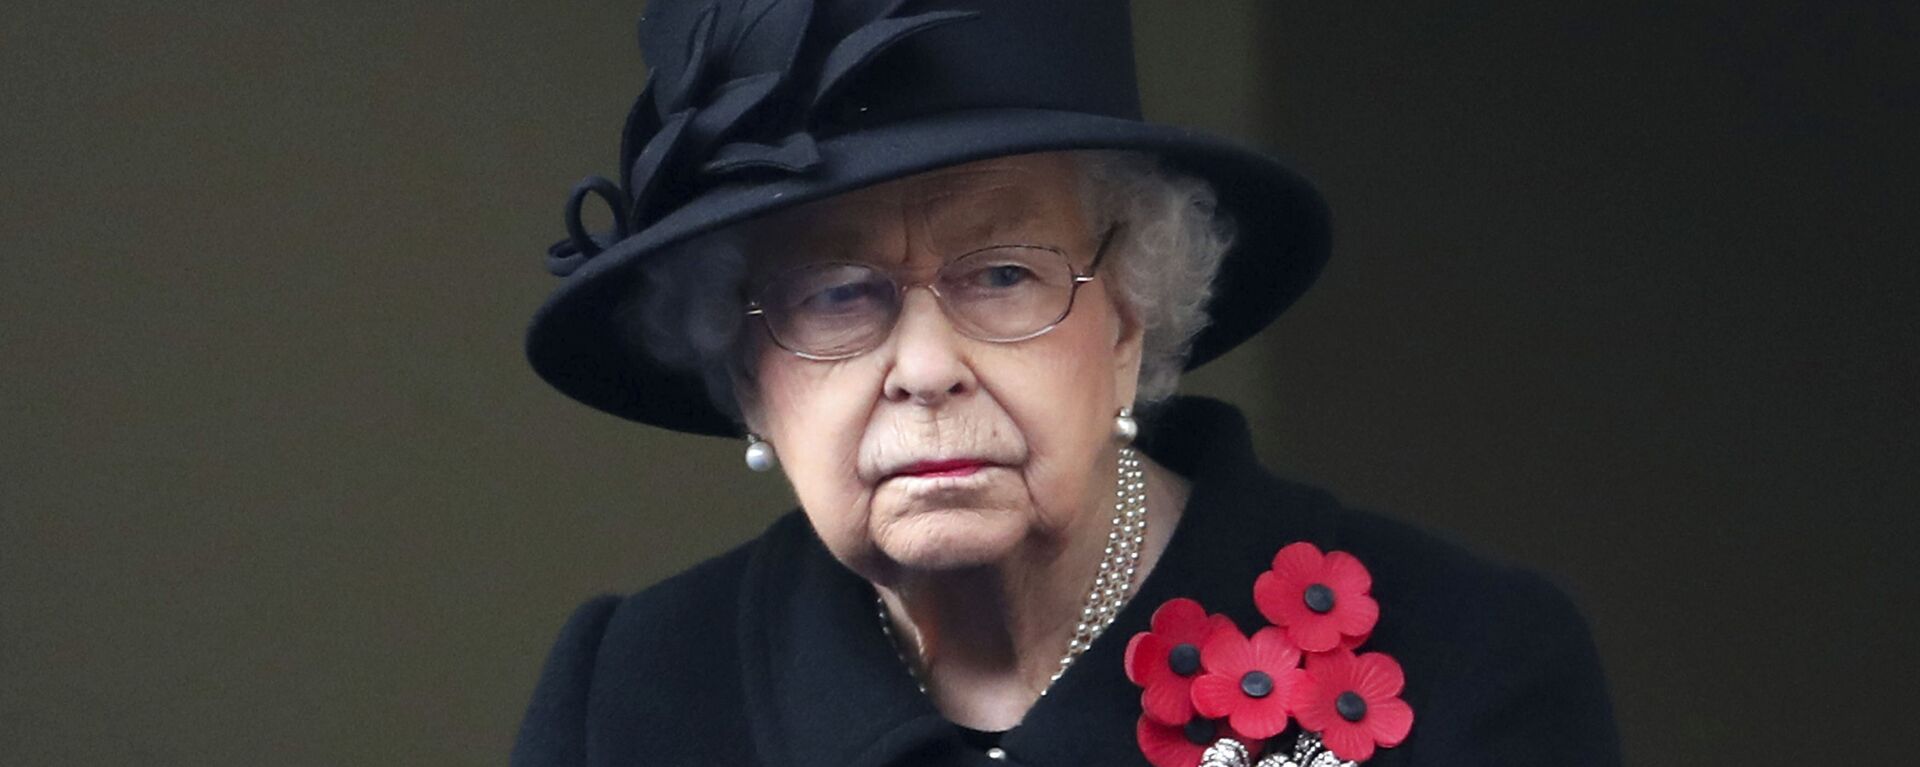 Britain's Queen Elizabeth II looks on from the balcony of the Foreign Office, during the Remembrance Sunday service at the Cenotaph, in Whitehall, London, Sunday Nov. 8, 2020 - Sputnik International, 1920, 15.11.2021